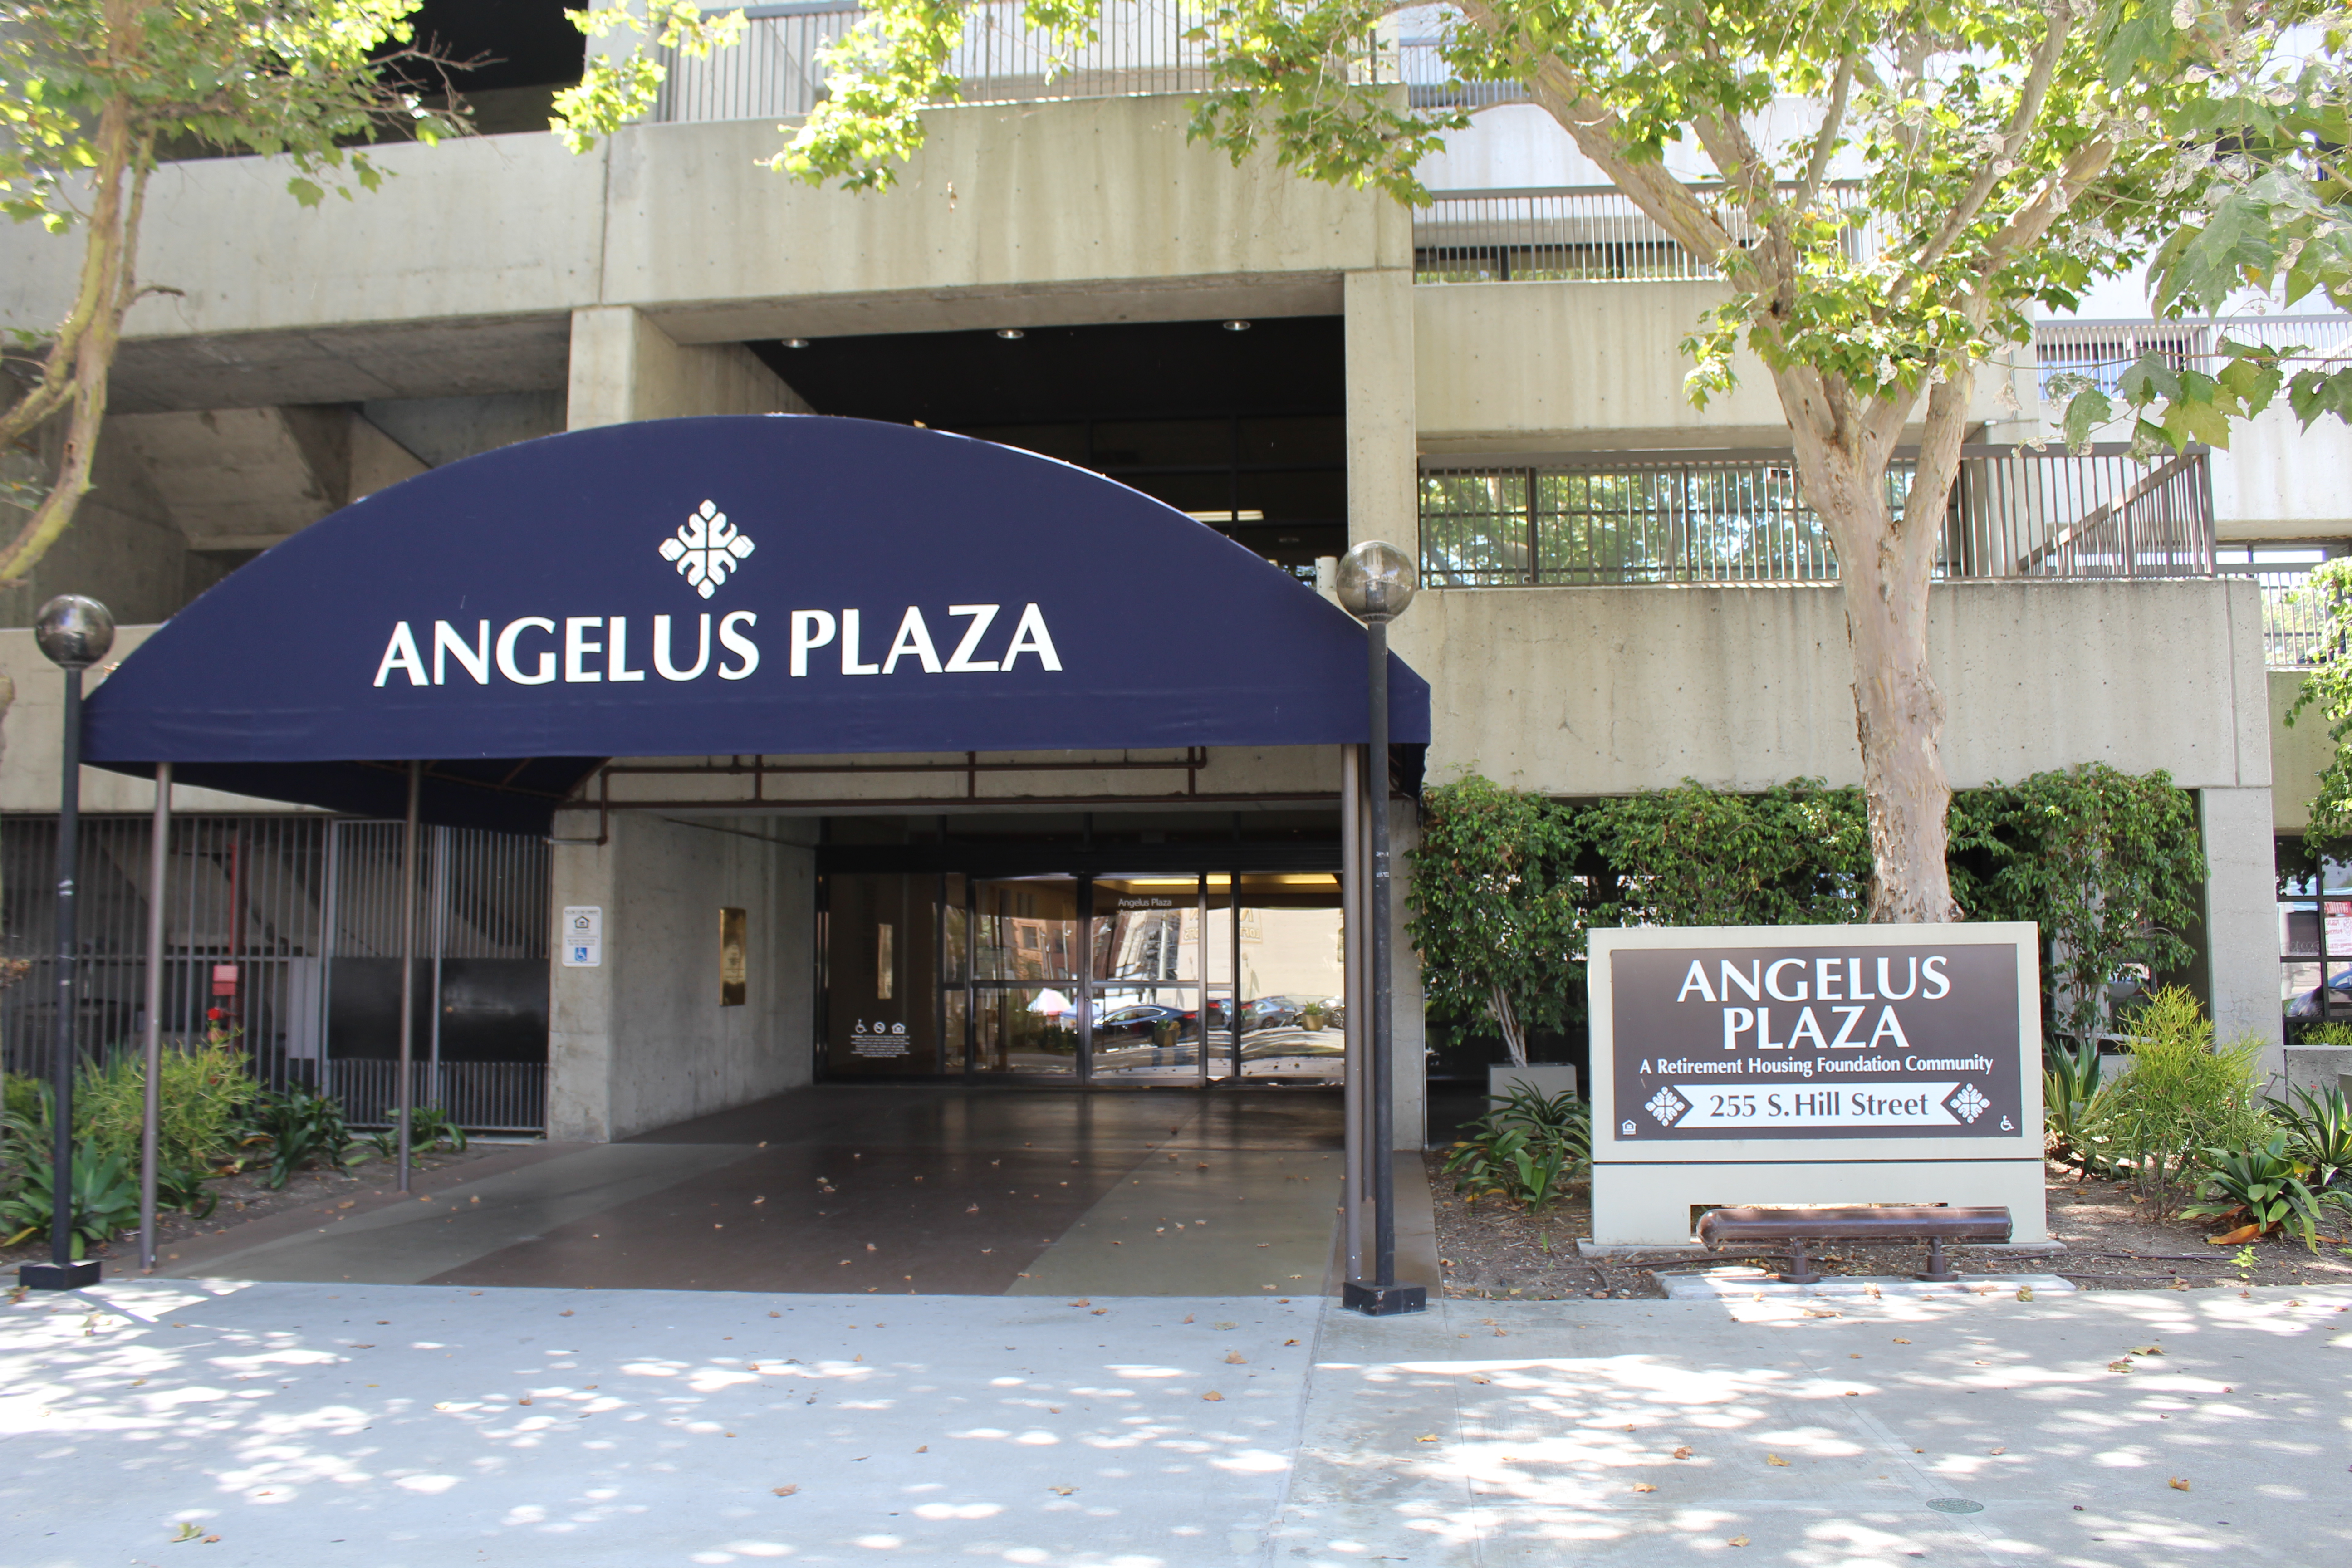 Close-up street view of the entrance to Angelus Plaza 1. Navy blue awning with white lettering covering the walkway to the building entrance